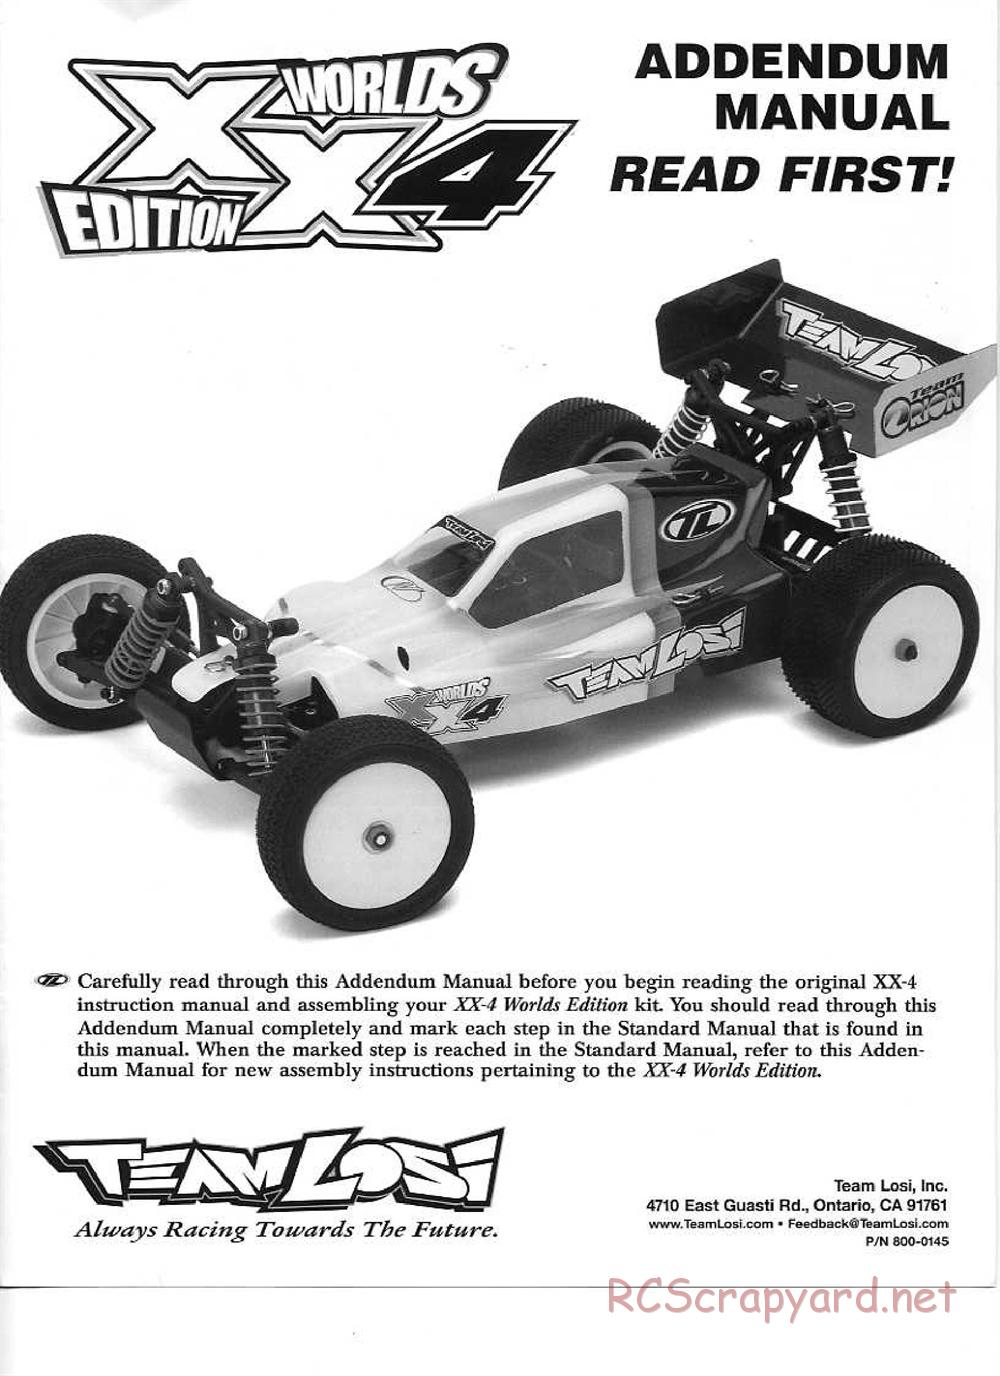 Team Losi - XX-4 Worlds Edition - Manual - Page 1